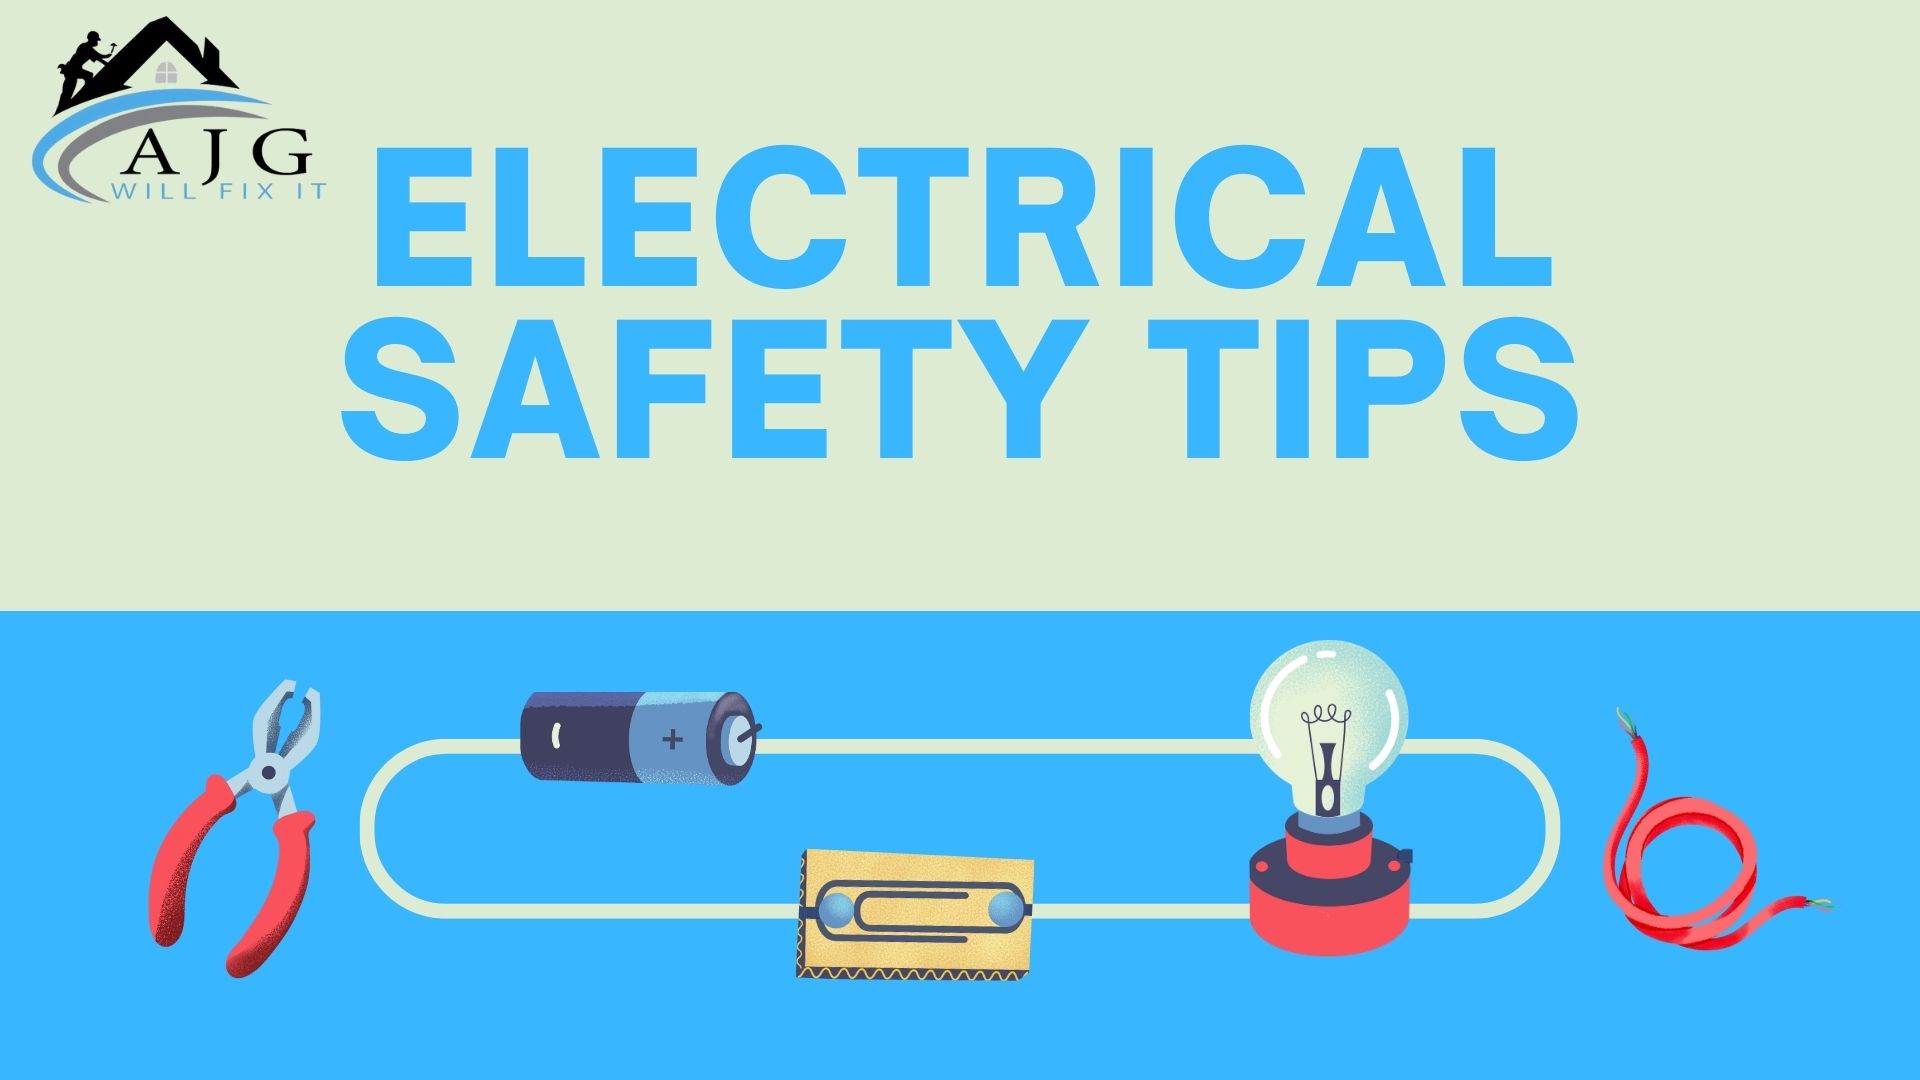 Ensuring Electrical Safety Tips for Every Home and Workplace